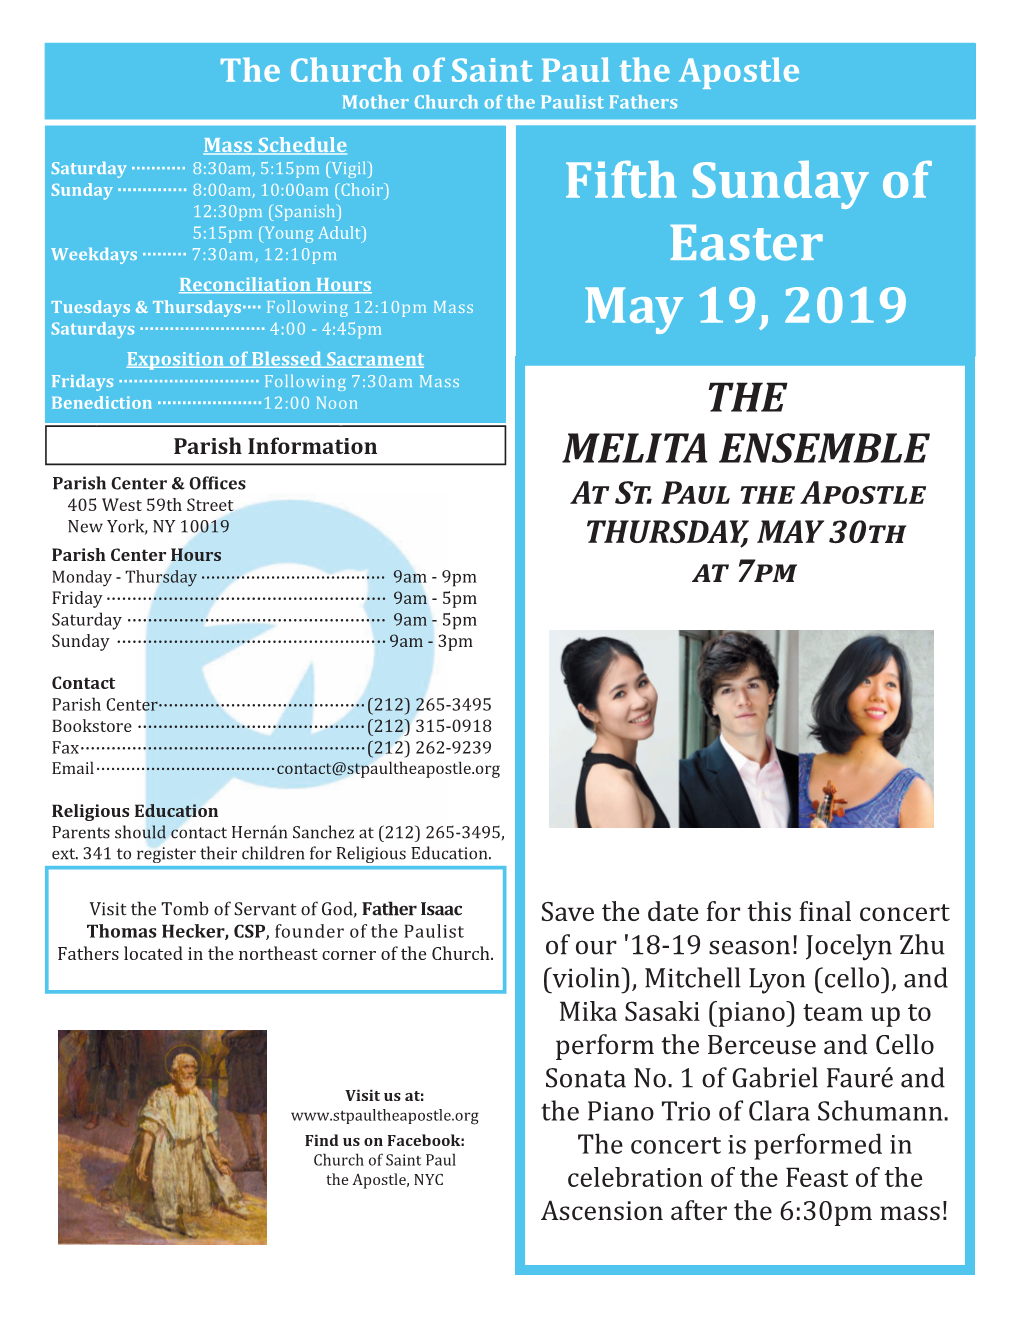 Fifth Sunday of Easter May 19, 2019